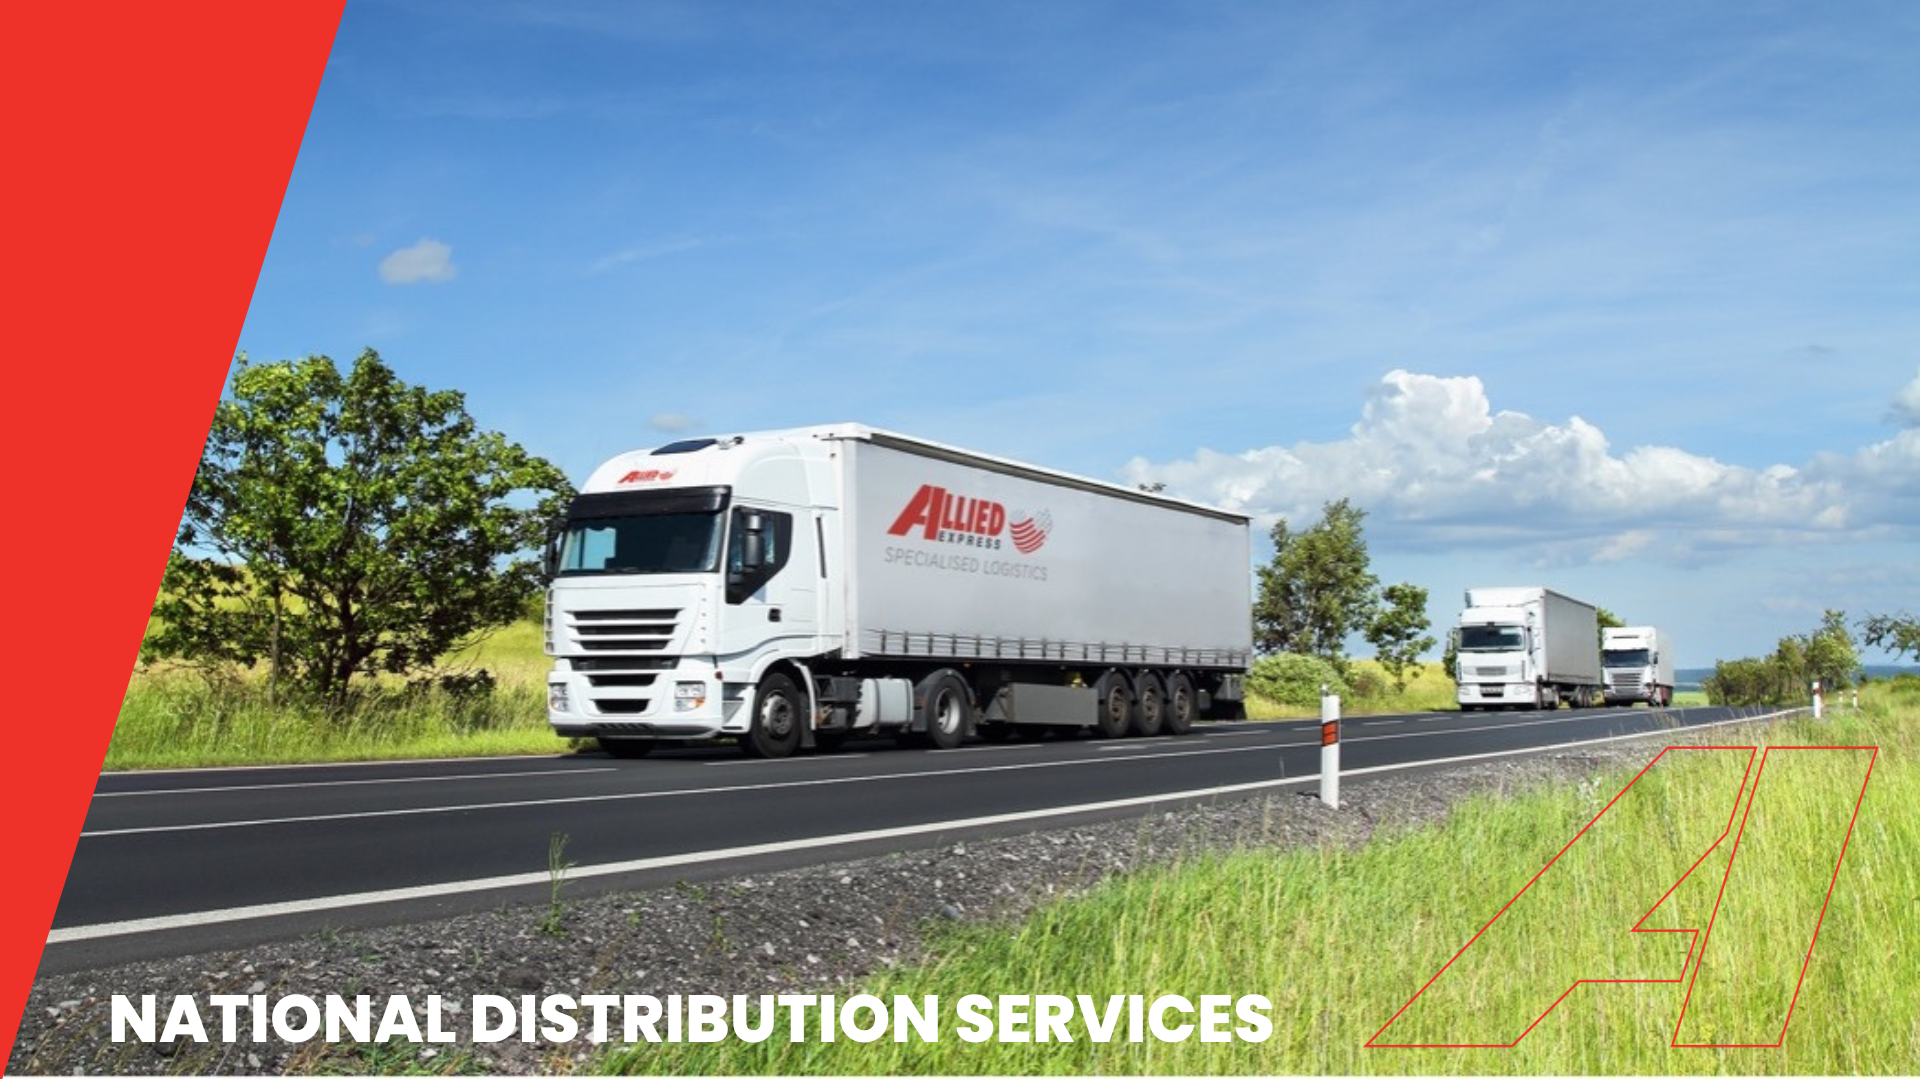 National Distribution Services